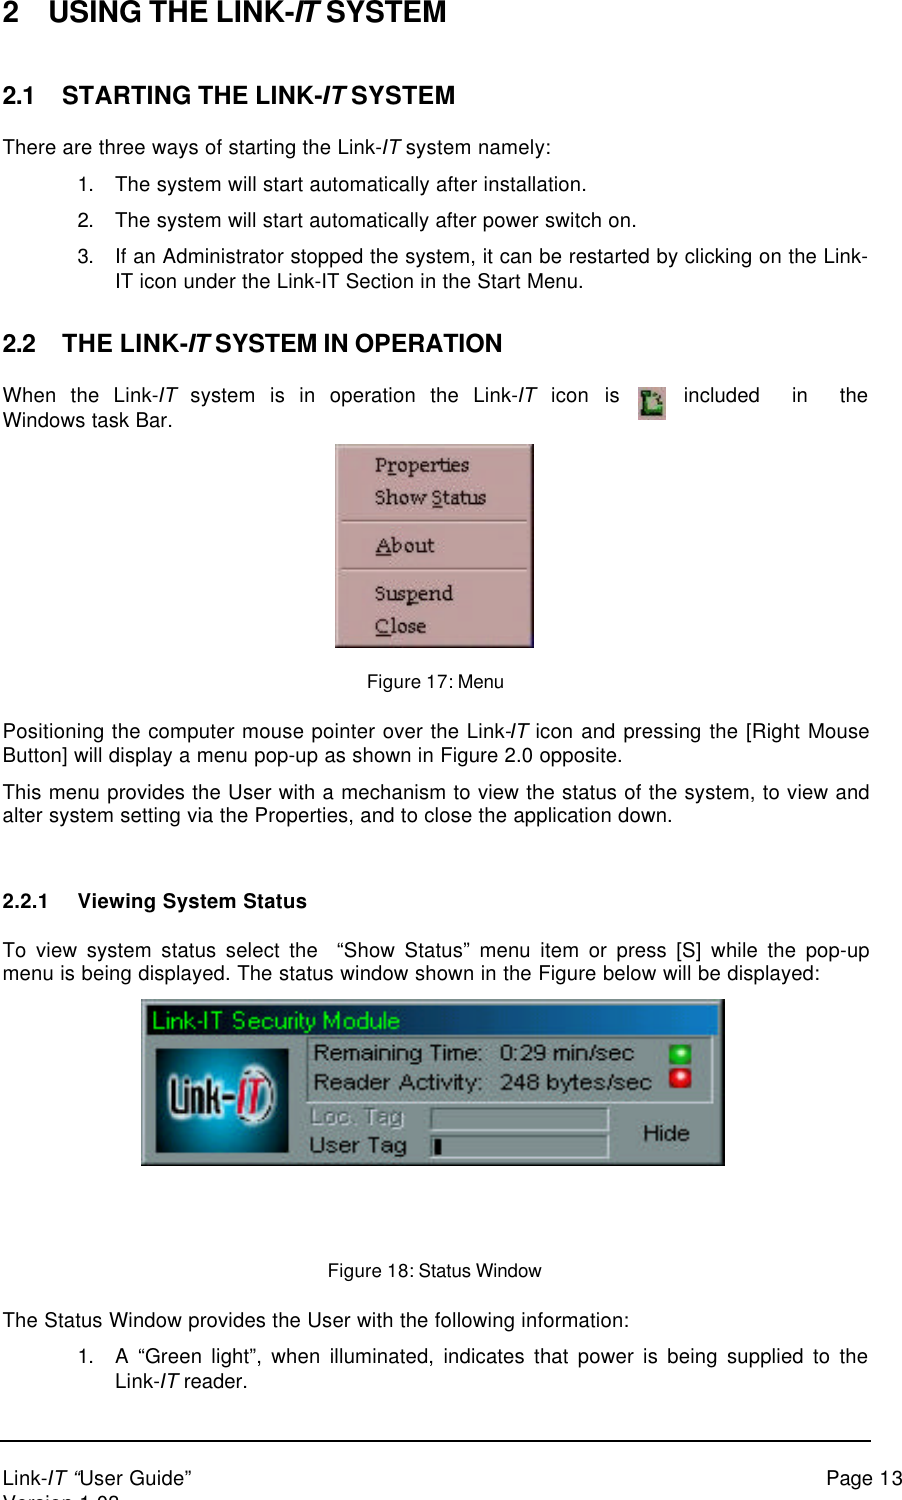 Link-IT “User Guide” Page 13Version 1.032 USING THE LINK-IT SYSTEM2.1 STARTING THE LINK-IT SYSTEMThere are three ways of starting the Link-IT system namely:1. The system will start automatically after installation.2. The system will start automatically after power switch on.3. If an Administrator stopped the system, it can be restarted by clicking on the Link-IT icon under the Link-IT Section in the Start Menu.2.2 THE LINK-IT SYSTEM IN OPERATIONWhen the Link-IT system is in operation the Link-IT icon is included in theWindows task Bar.Figure 17: MenuPositioning the computer mouse pointer over the Link-IT icon and pressing the [Right MouseButton] will display a menu pop-up as shown in Figure 2.0 opposite.This menu provides the User with a mechanism to view the status of the system, to view andalter system setting via the Properties, and to close the application down.2.2.1 Viewing System StatusTo view system status select the  “Show Status” menu item or press [S] while the pop-upmenu is being displayed. The status window shown in the Figure below will be displayed:Figure 18: Status WindowThe Status Window provides the User with the following information:1. A “Green light”, when illuminated, indicates that power is being supplied to theLink-IT reader.